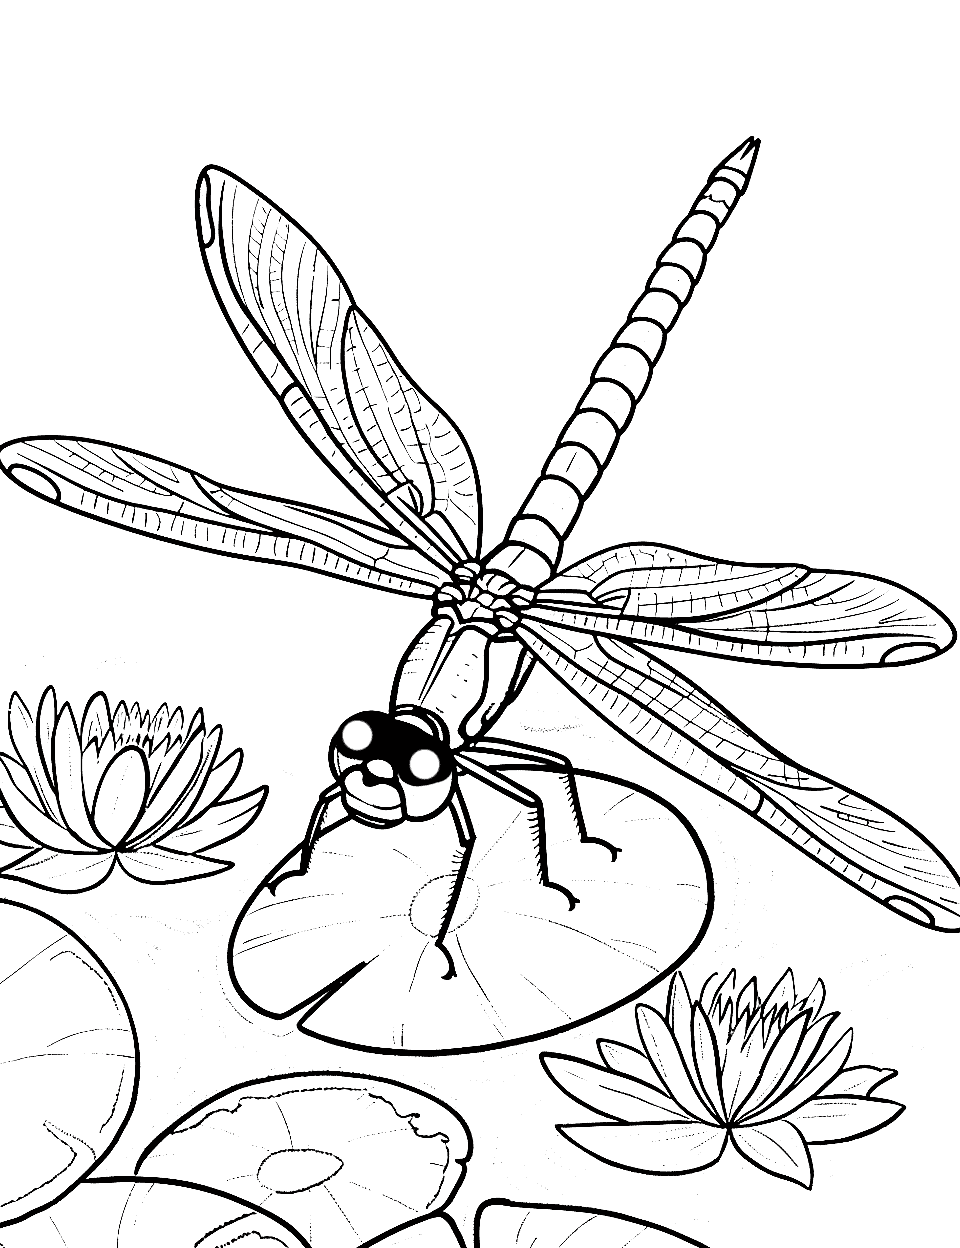 Dragonfly on a Lily Pad Insect Coloring Page - A dragonfly perched on a lily pad in the pond.